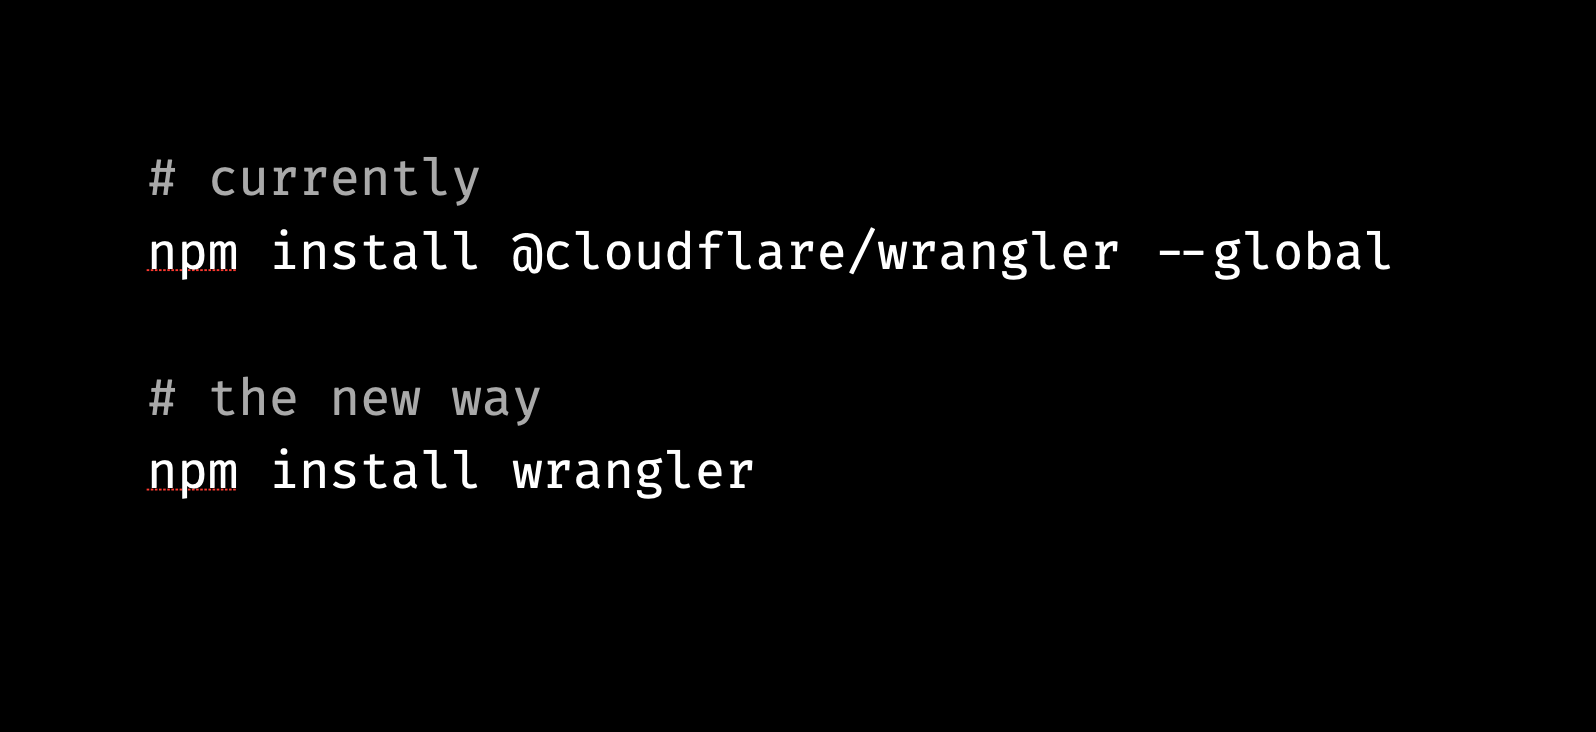 Previously, the command to install wrangler was “npm install @cloudflare/wrangler --global”. The newer, simpler way is “npm install wrangler”